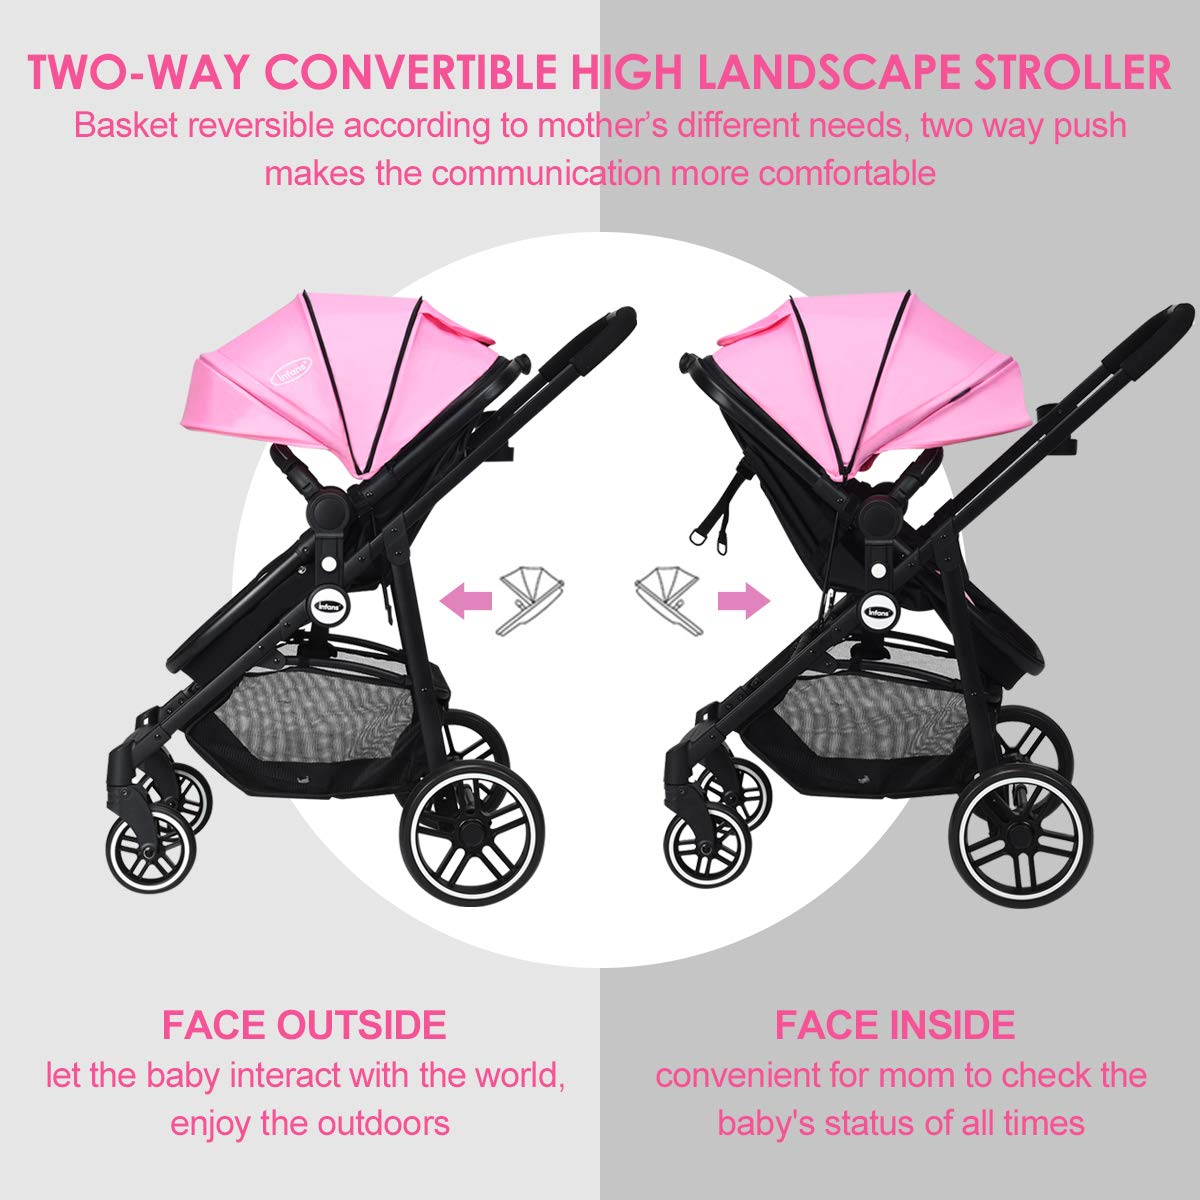 Top Quality Newborn Products Cheap Price High Landscape Baby